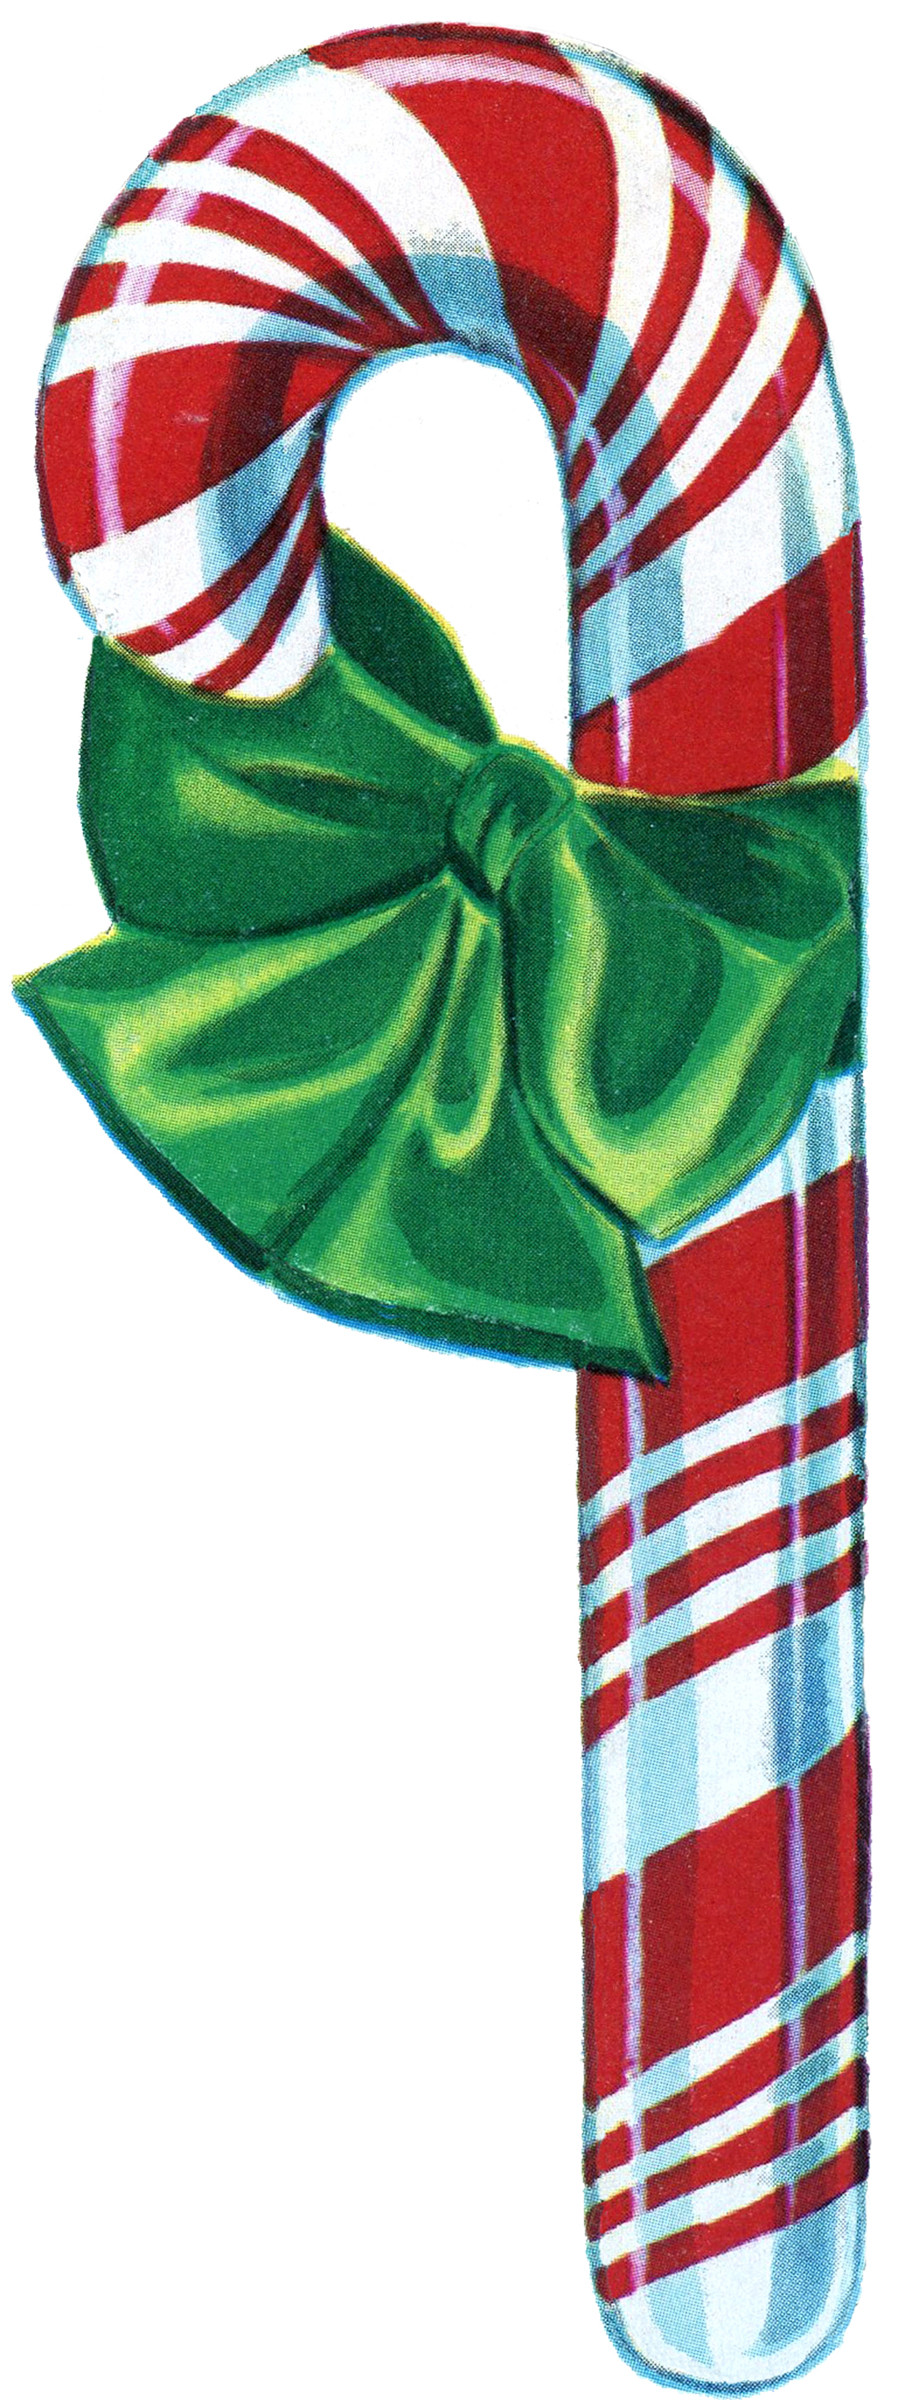 Christmas Candy Canes
 Free Vintage Christmas Clip Art Candy Cane The